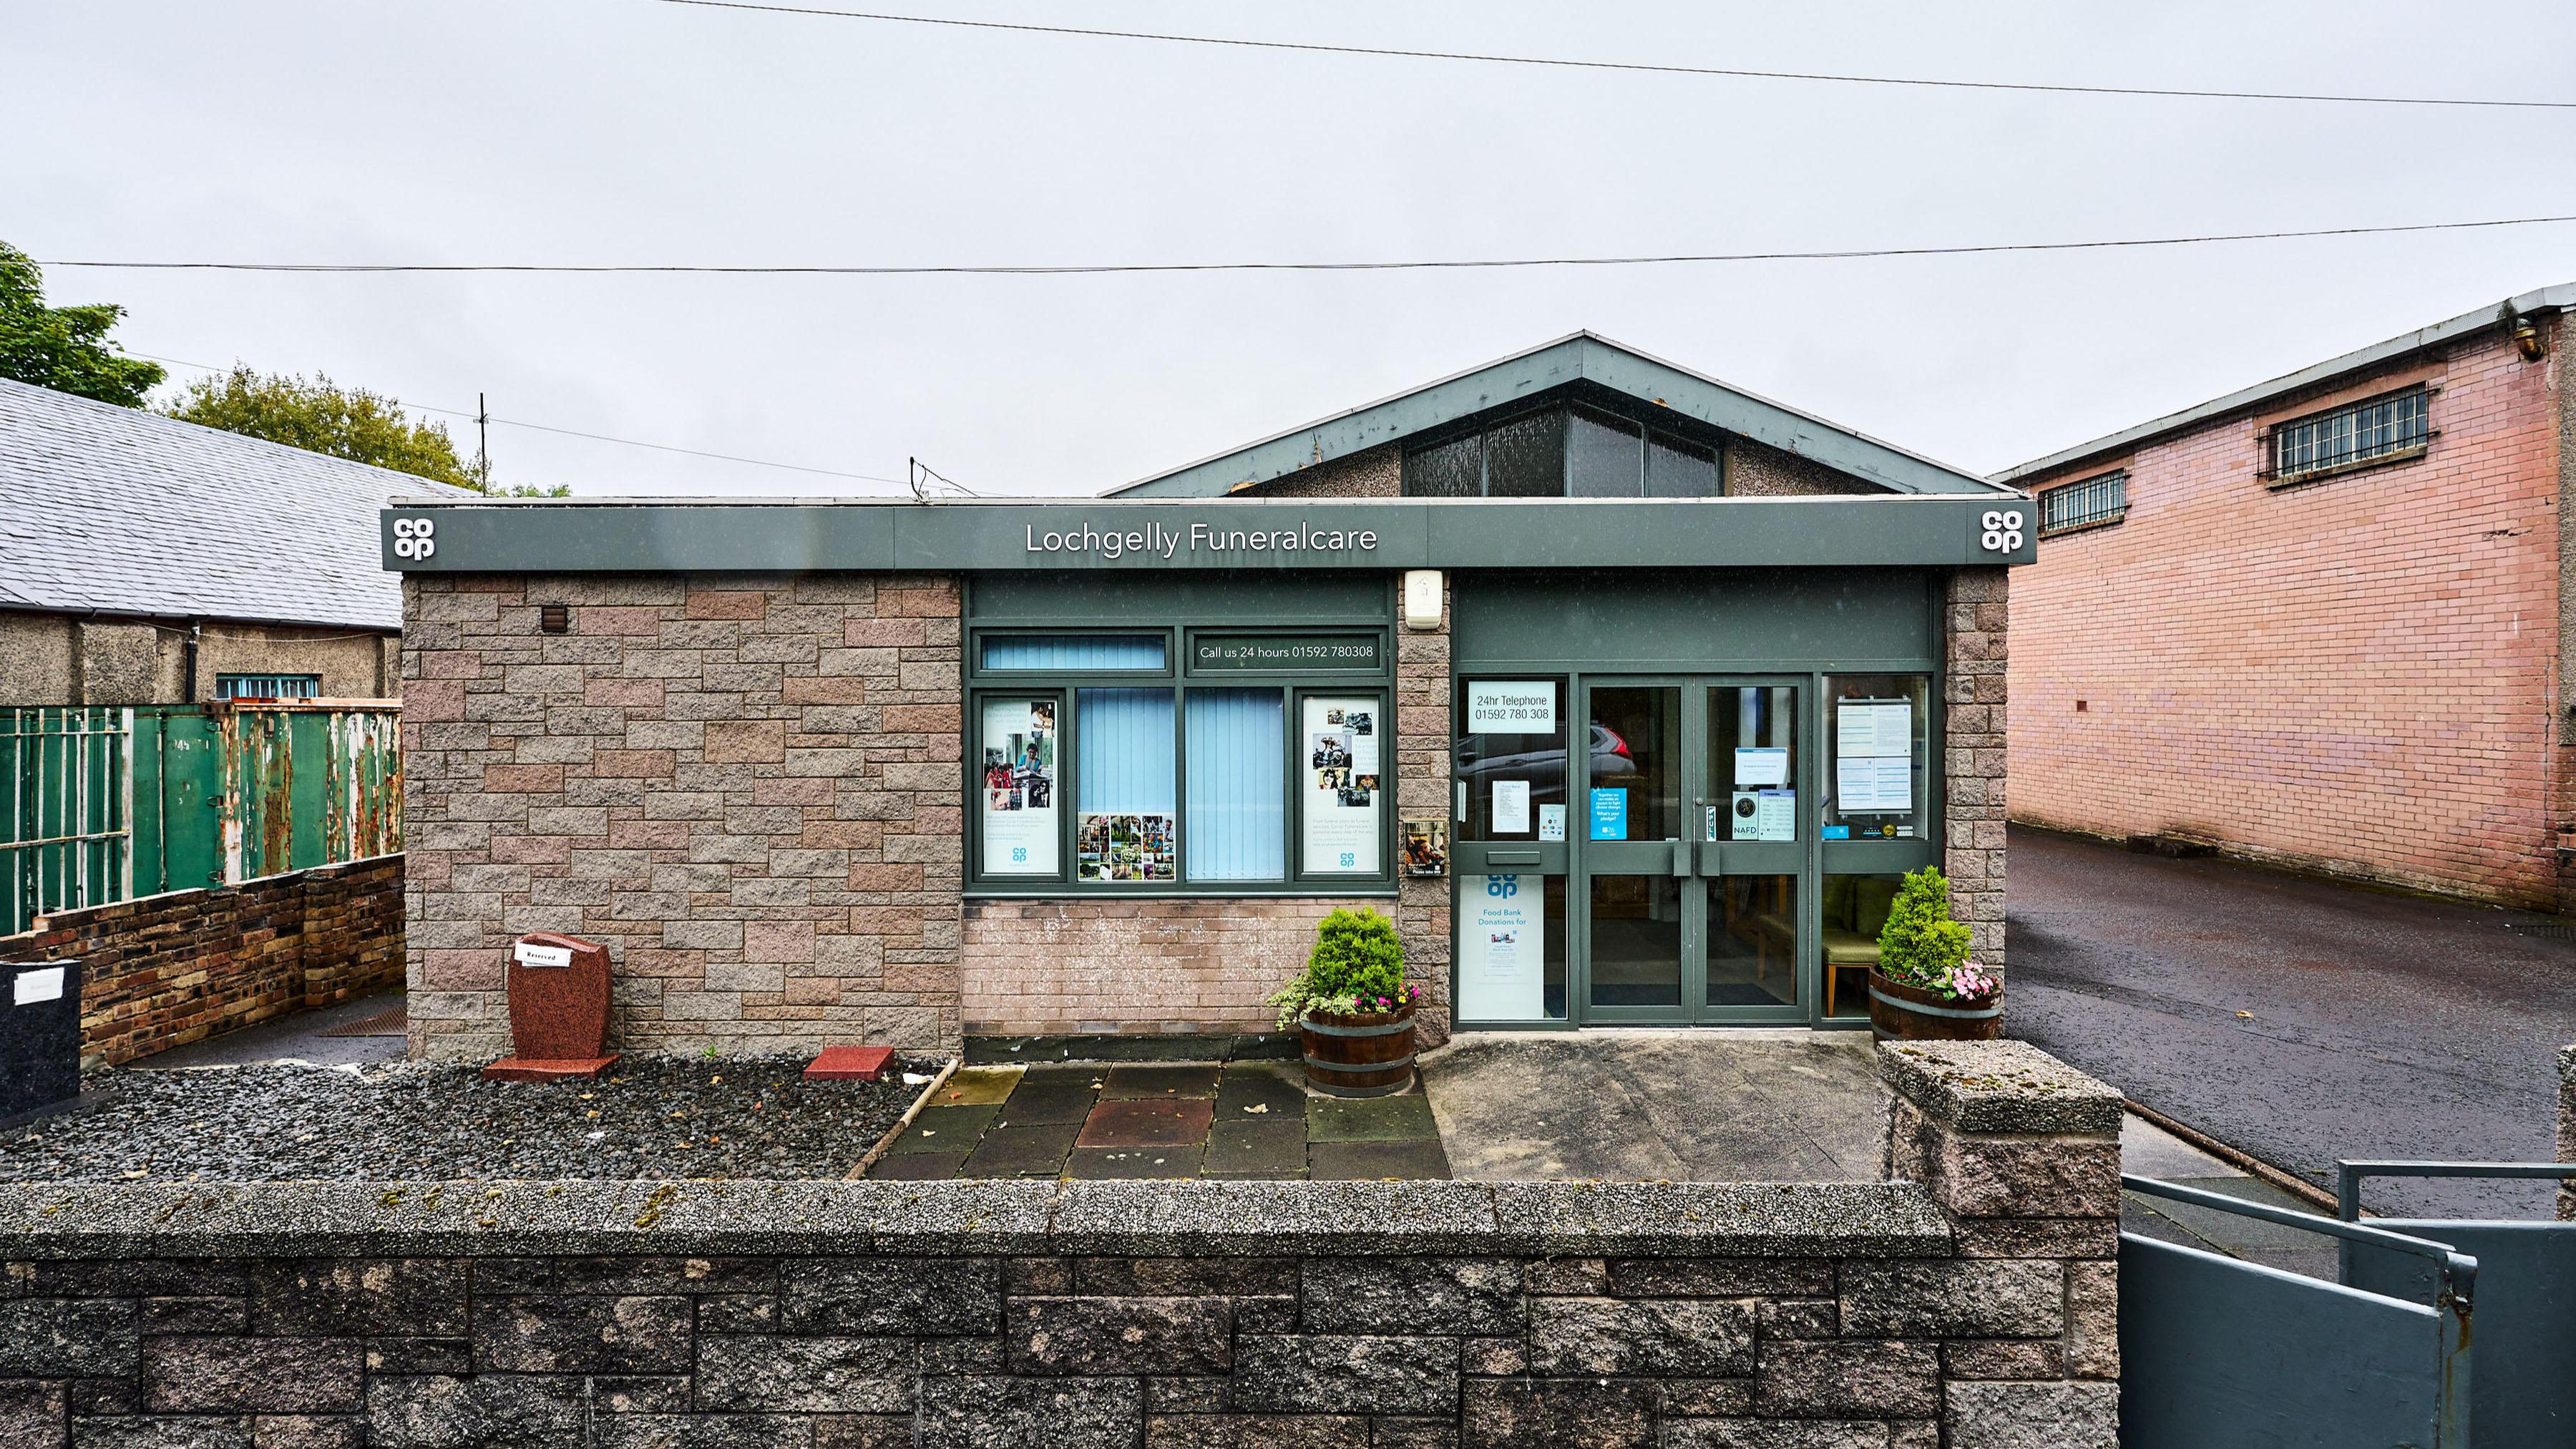 Images Lochgelly Funeralcare